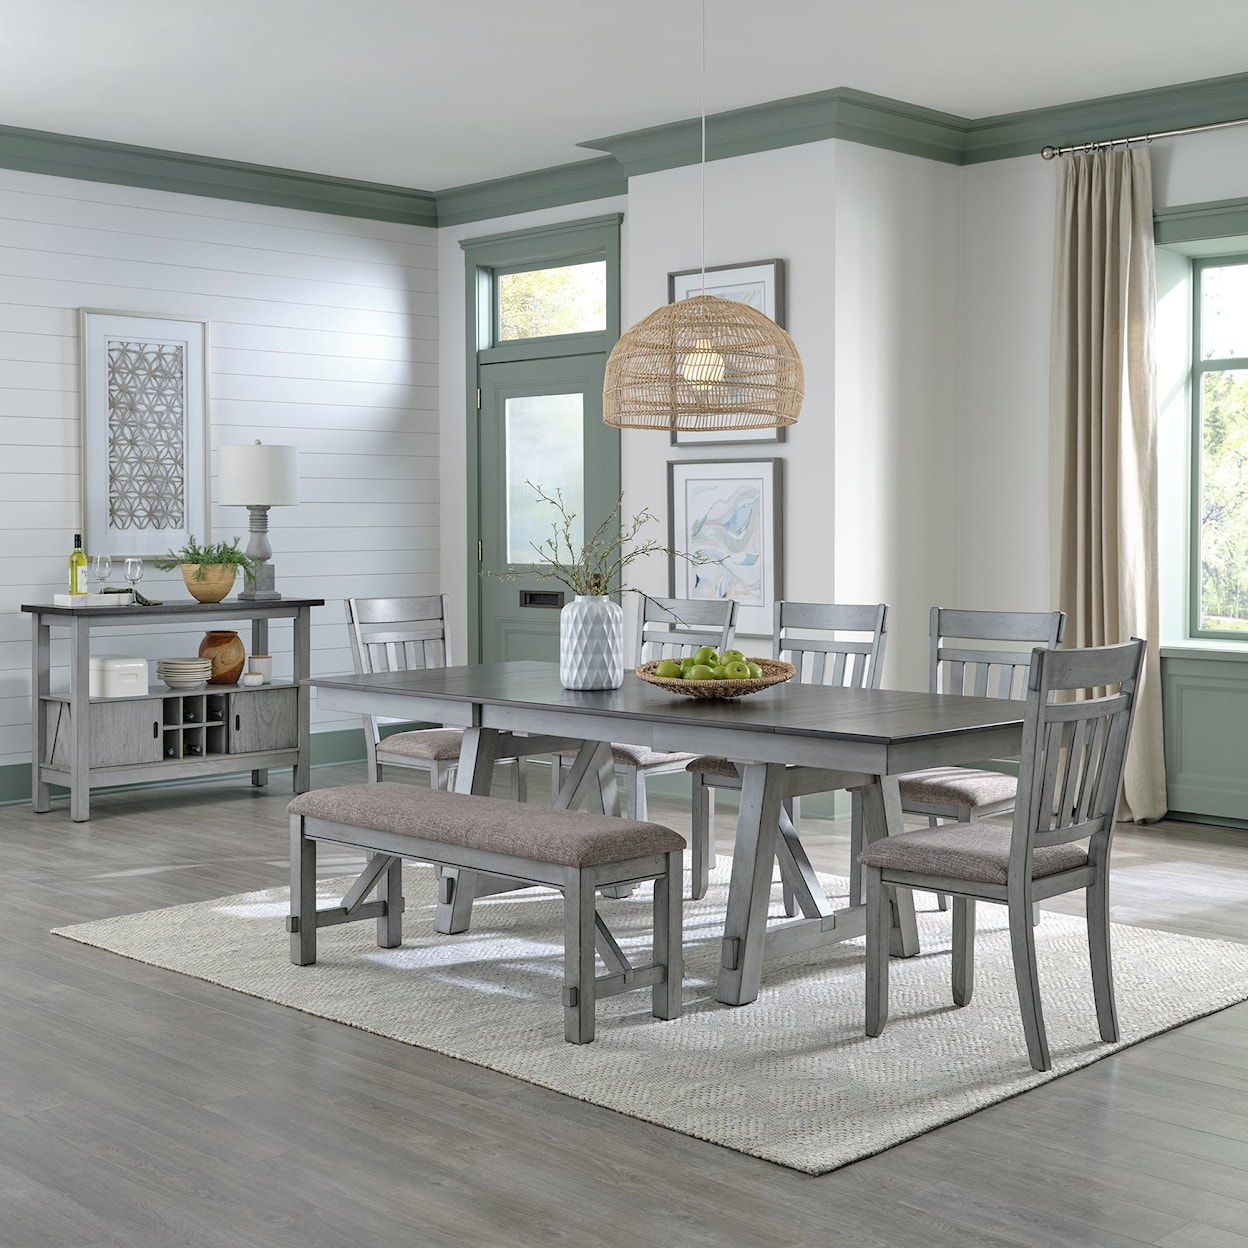 Libby Newport Dining Table